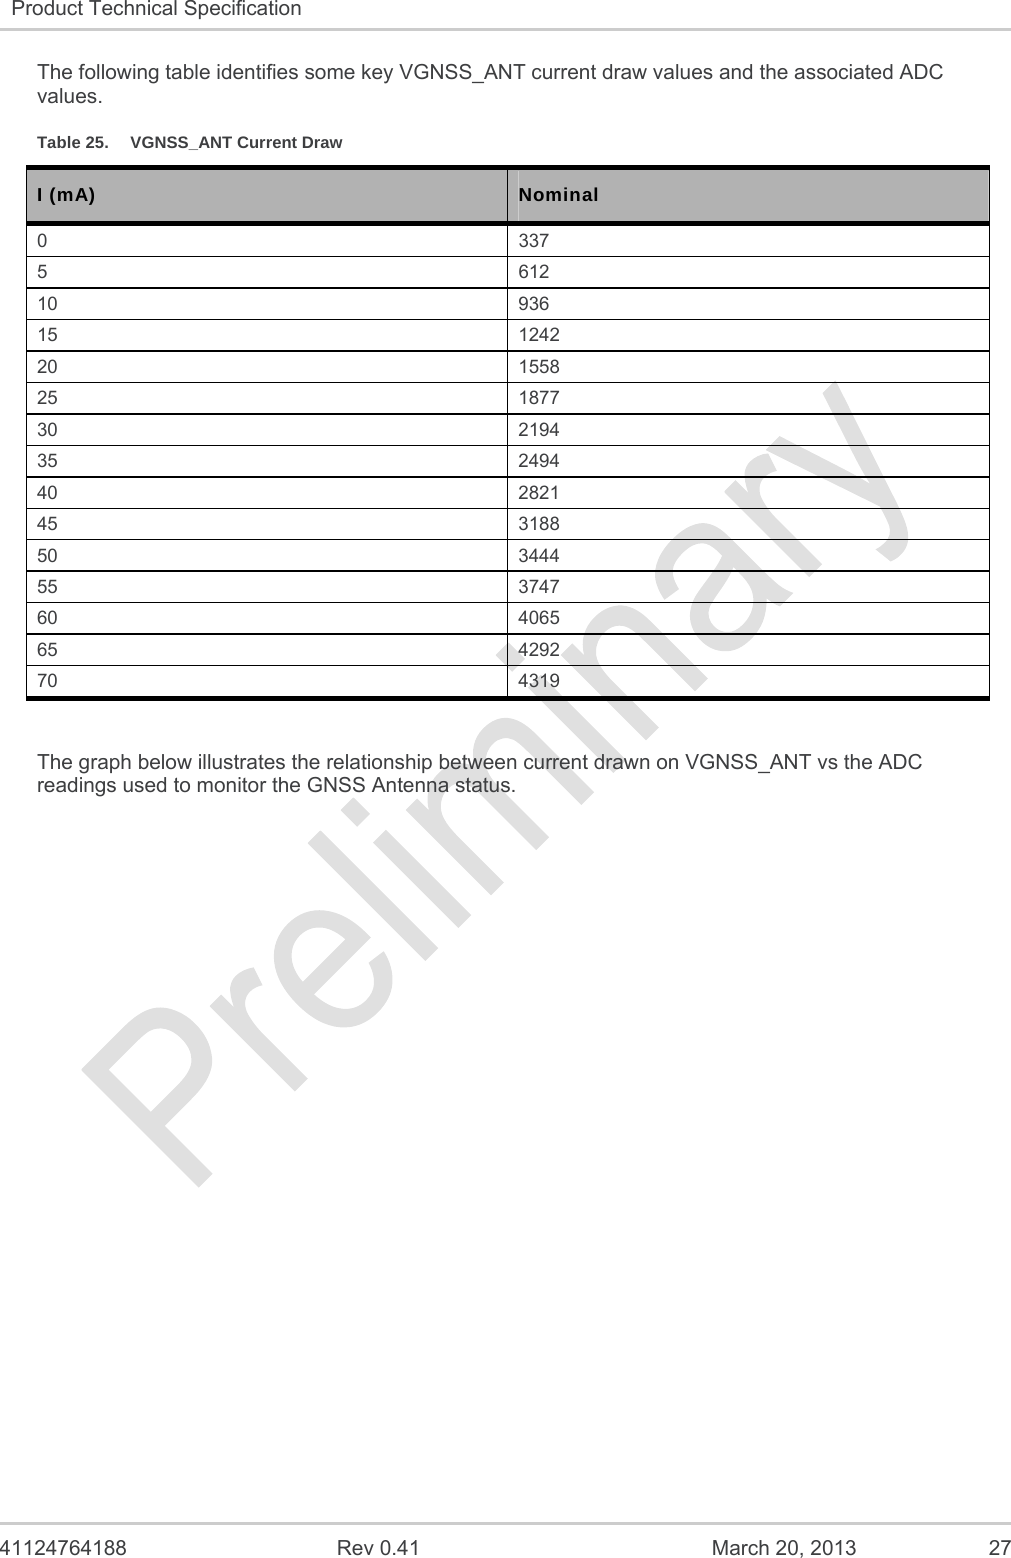   41124764188  Rev 0.41  March 20, 2013  27 Product Technical Specification   The following table identifies some key VGNSS_ANT current draw values and the associated ADC values. Table 25.  VGNSS_ANT Current Draw I (mA) Nominal 0 337 5 612 10 936 15 1242 20 1558 25 1877 30 2194 35 2494 40 2821 45 3188 50 3444 55 3747 60 4065 65 4292 70 4319  The graph below illustrates the relationship between current drawn on VGNSS_ANT vs the ADC readings used to monitor the GNSS Antenna status. 